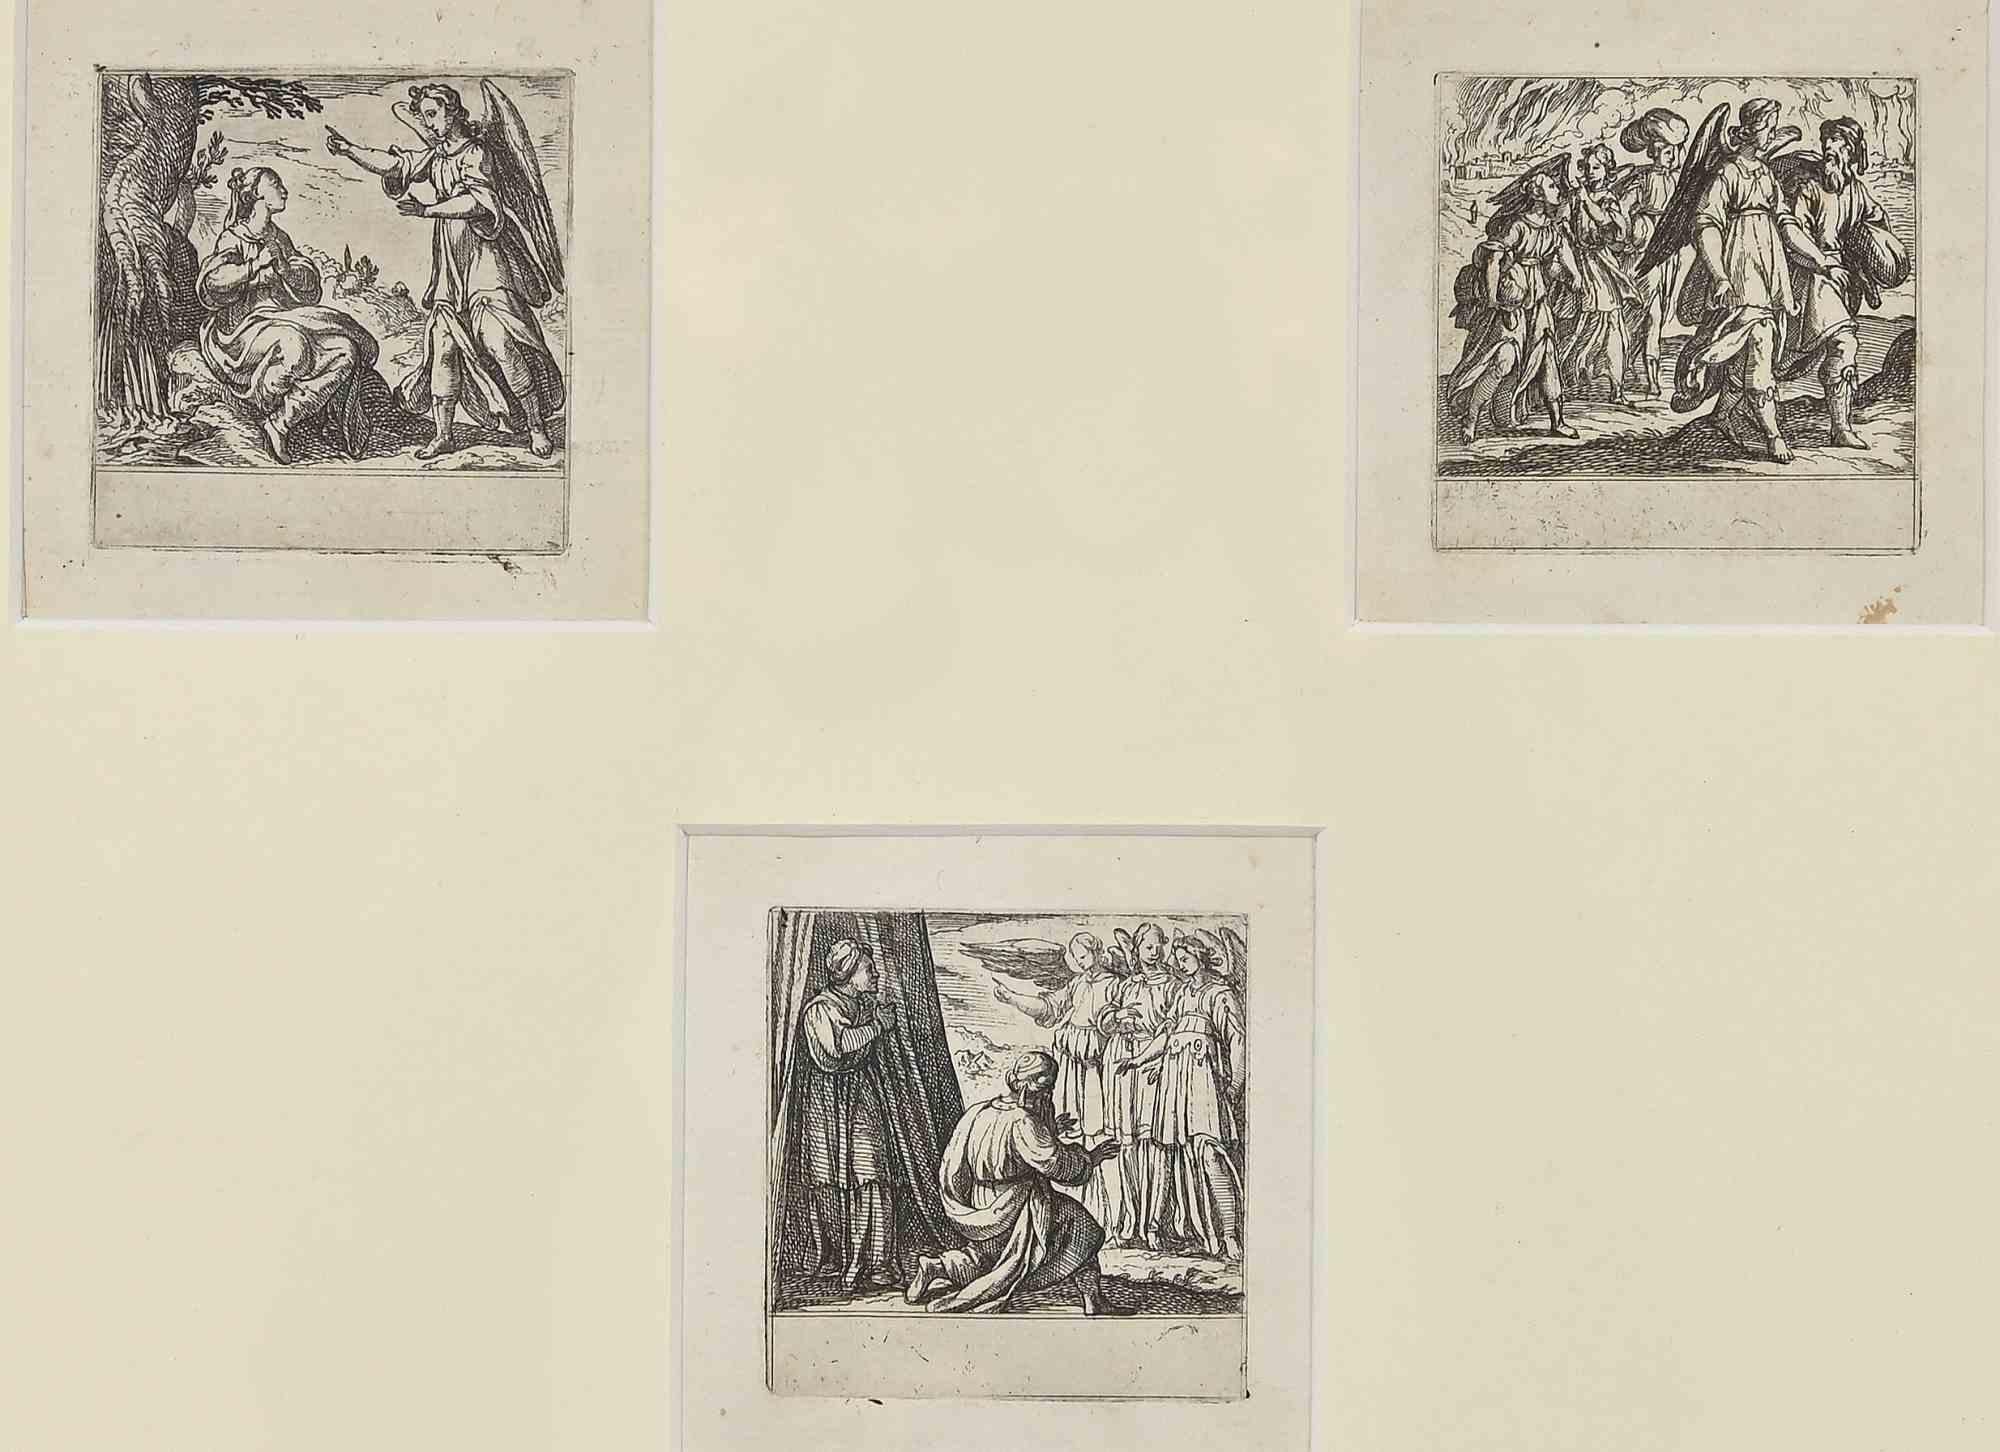 Stories from Genesis is an etching realized by Antonio Tempesta in the early 17th Century.

From left to right: Annunciation, City of Sodom burning. Lot who is saved with his daughters escorted by Angels

It's part of series of three plates. 

3